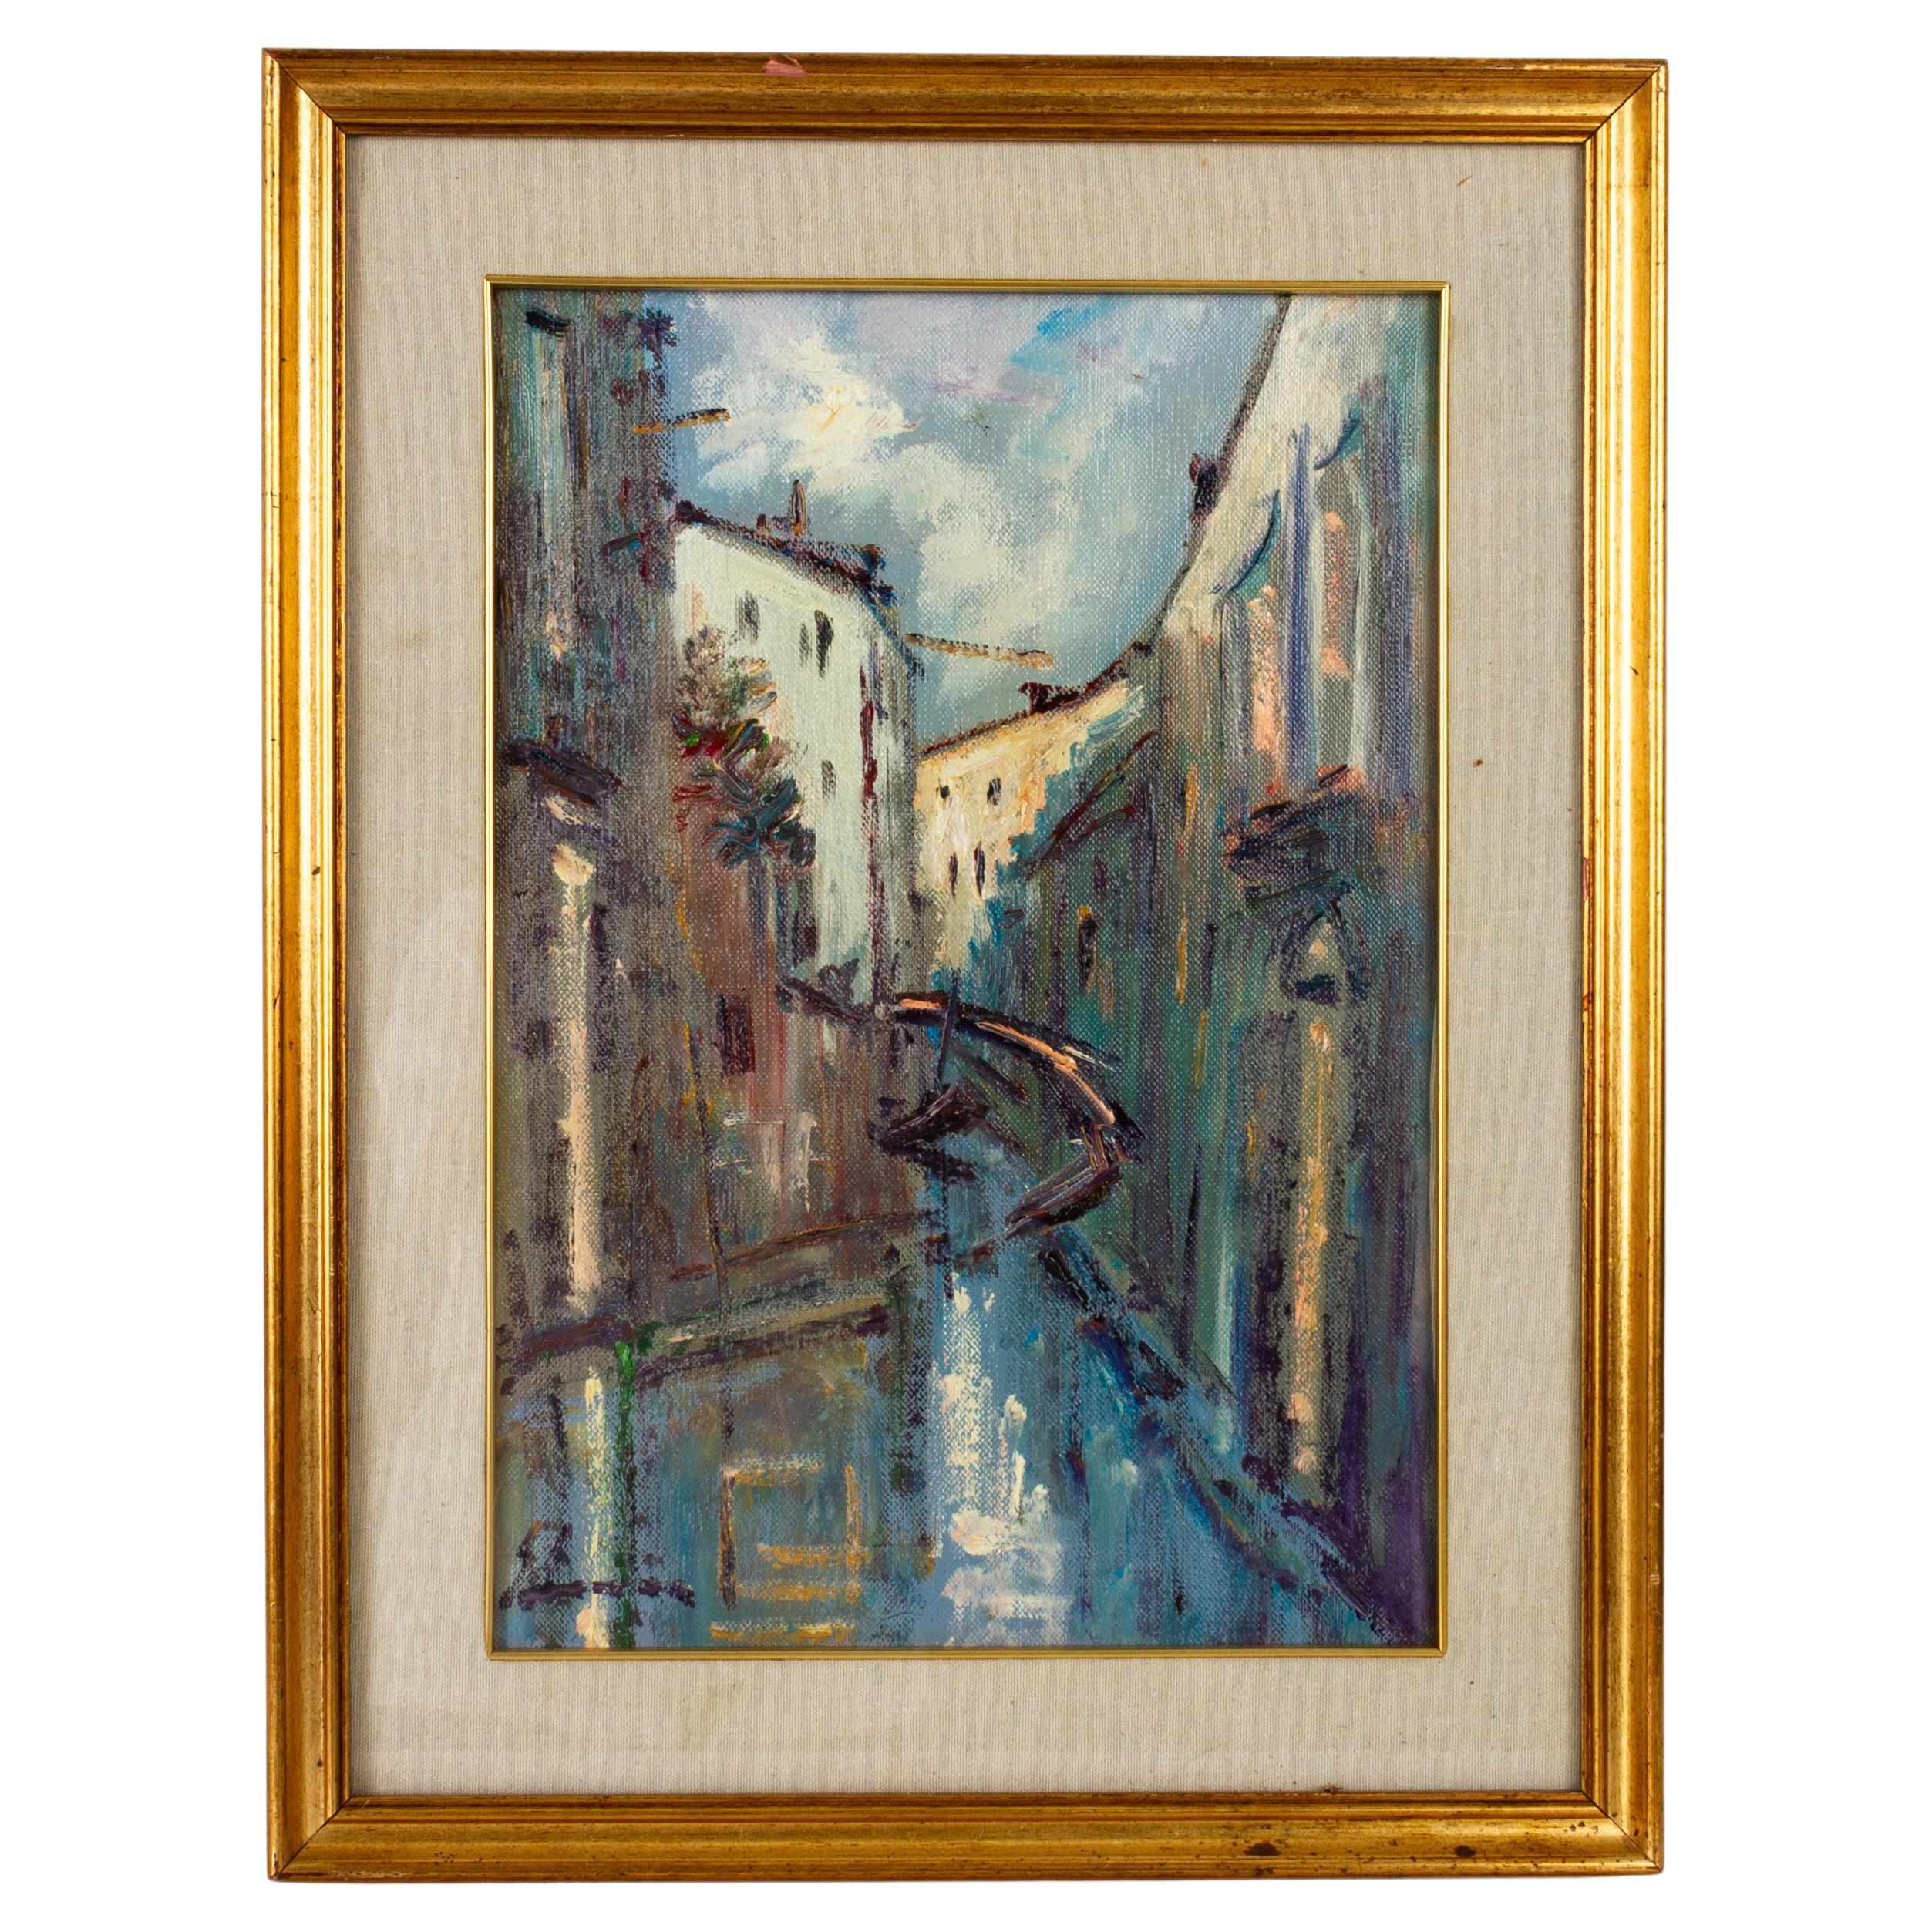 Signed Venetian Canal Oil Painting 20th Century